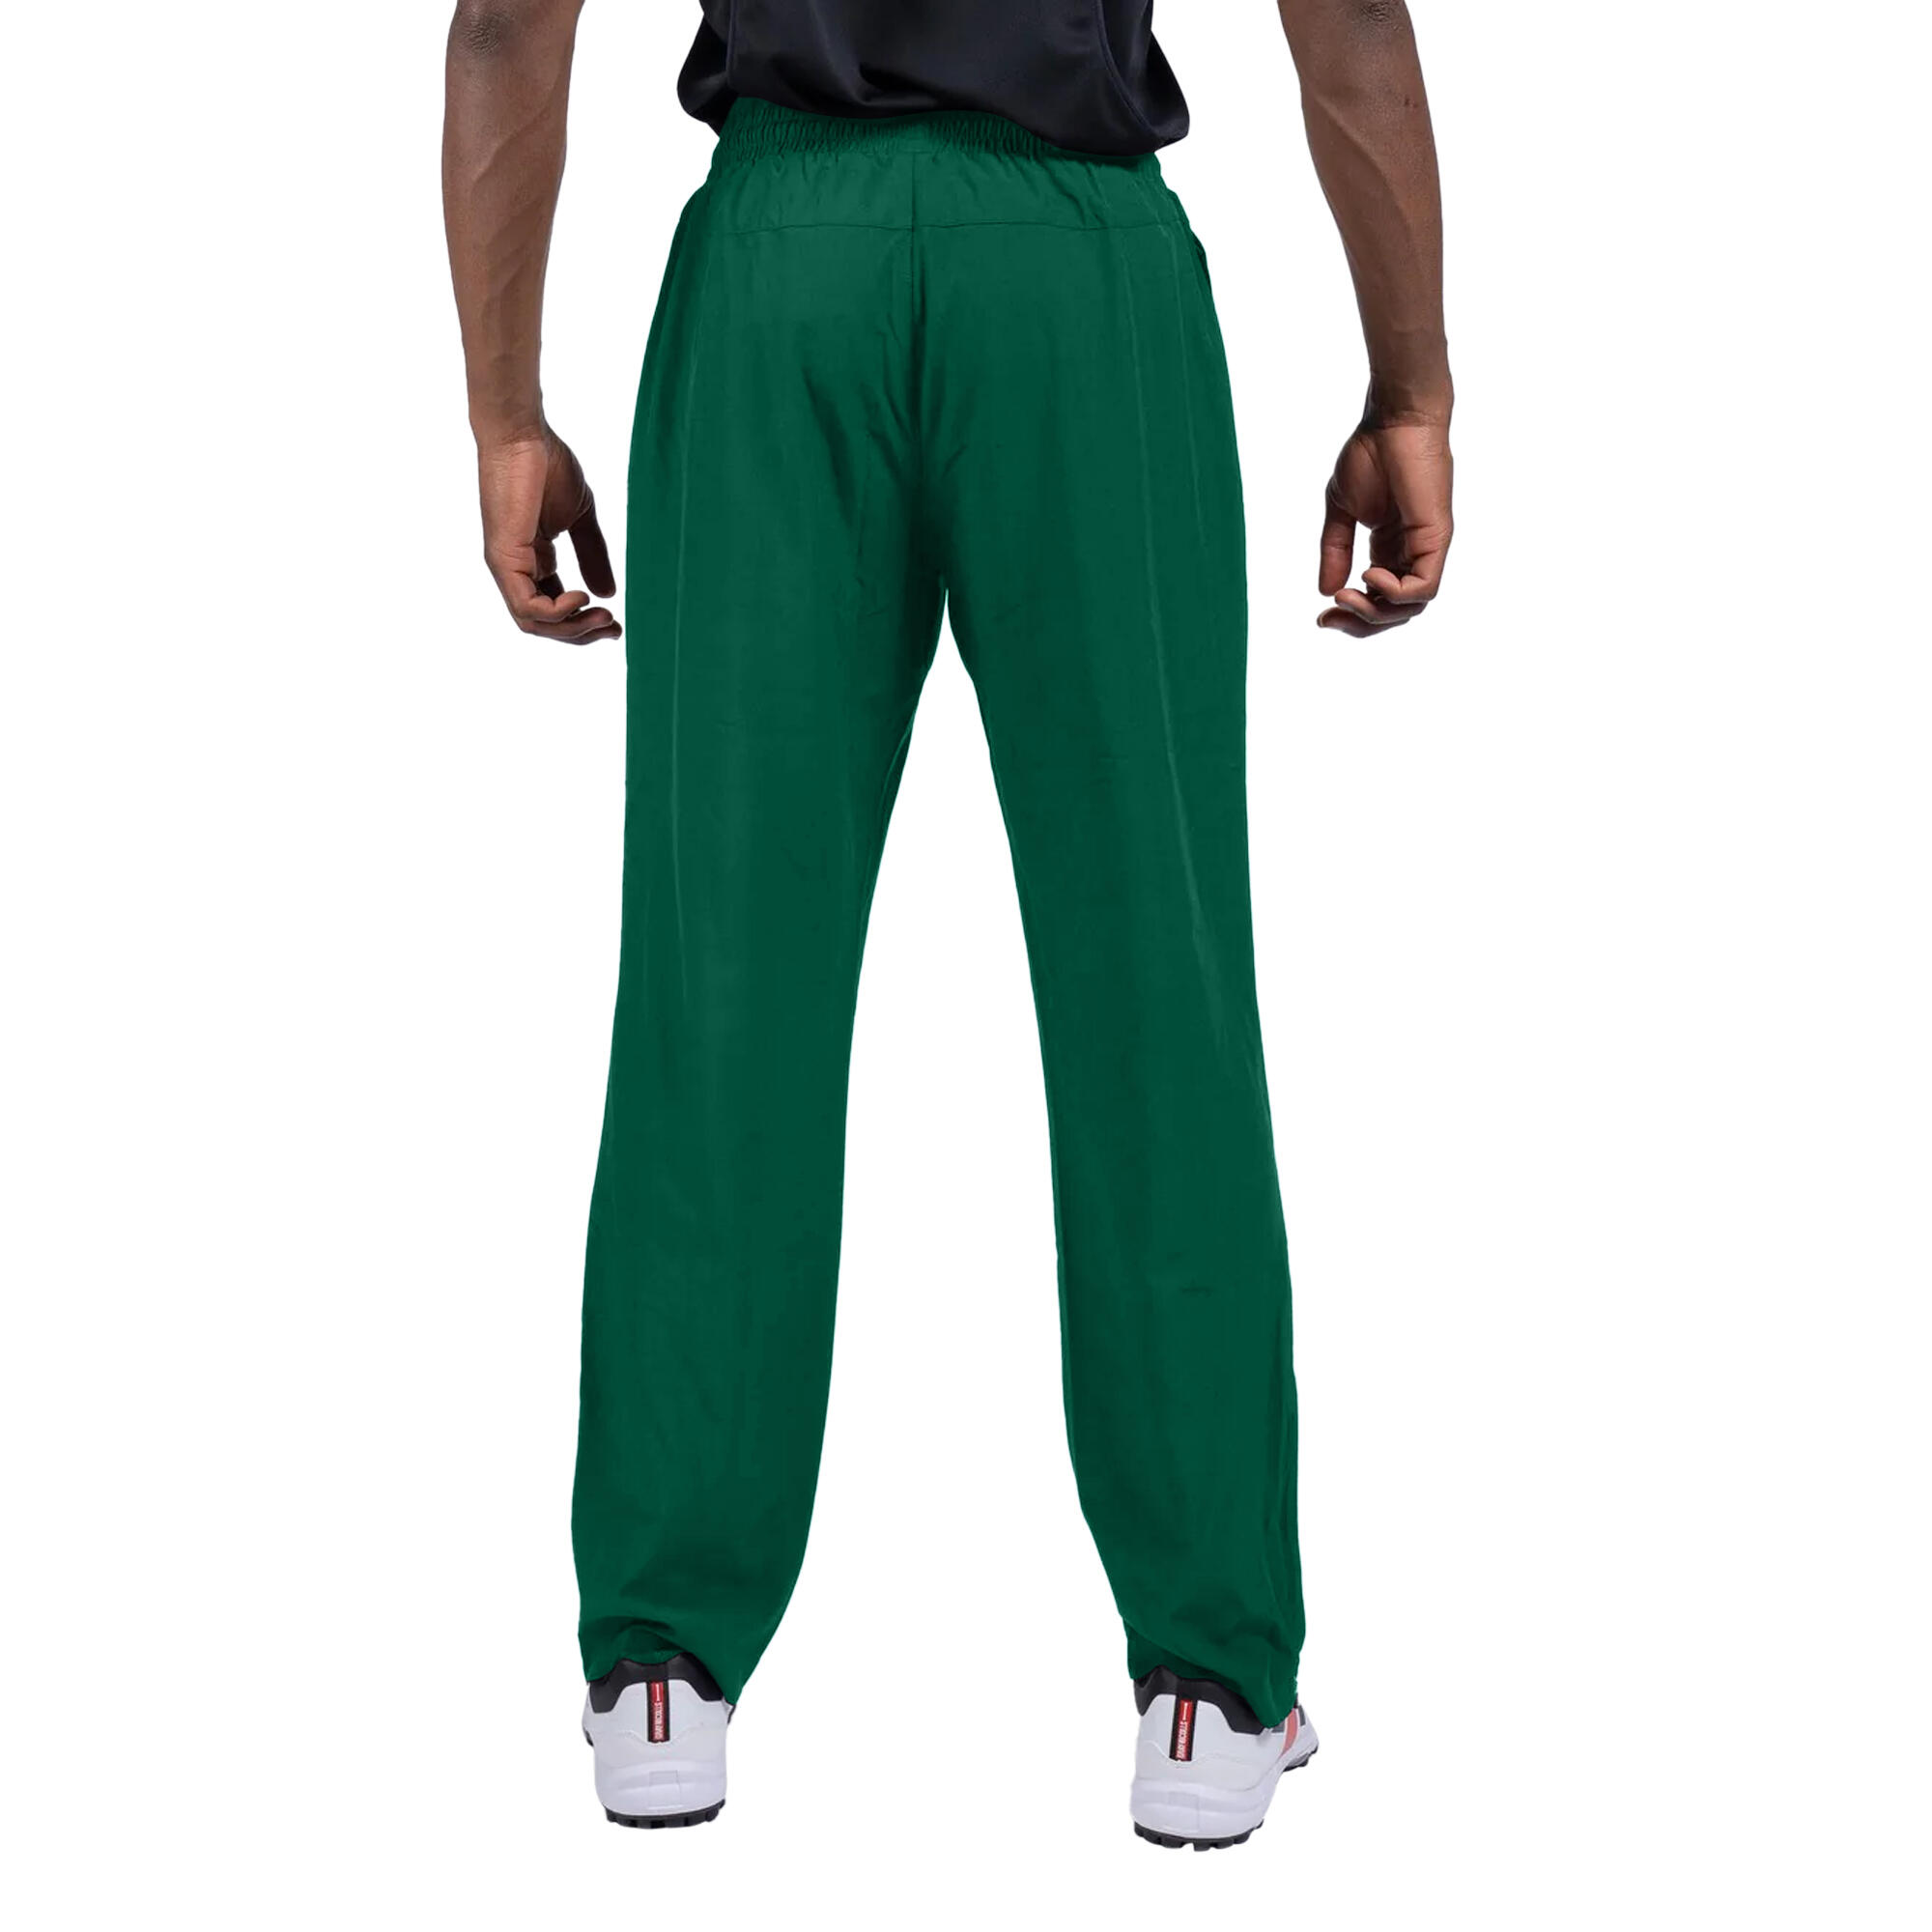 Adults Unisex Storm Track Trousers (Green) 2/3